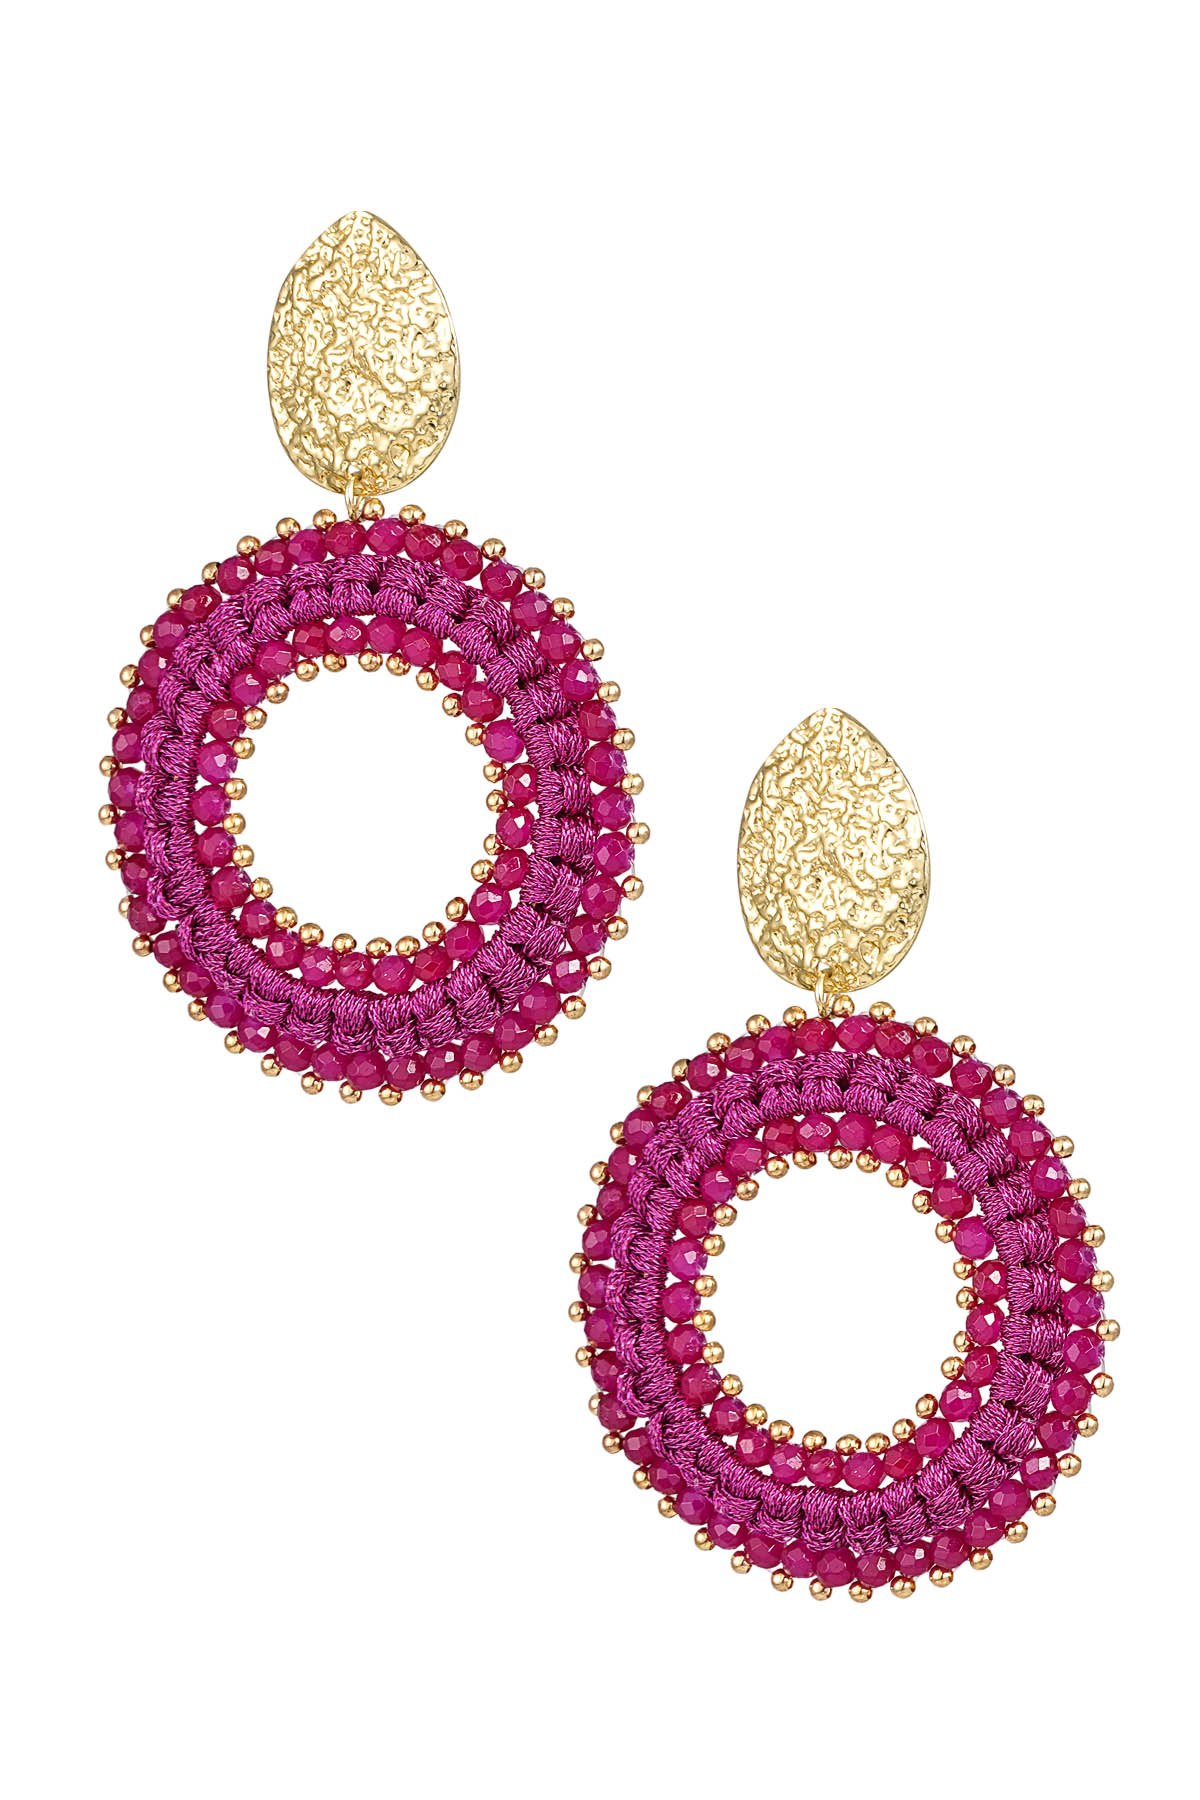 Round earrings with beads - gold/fuchsia h5 